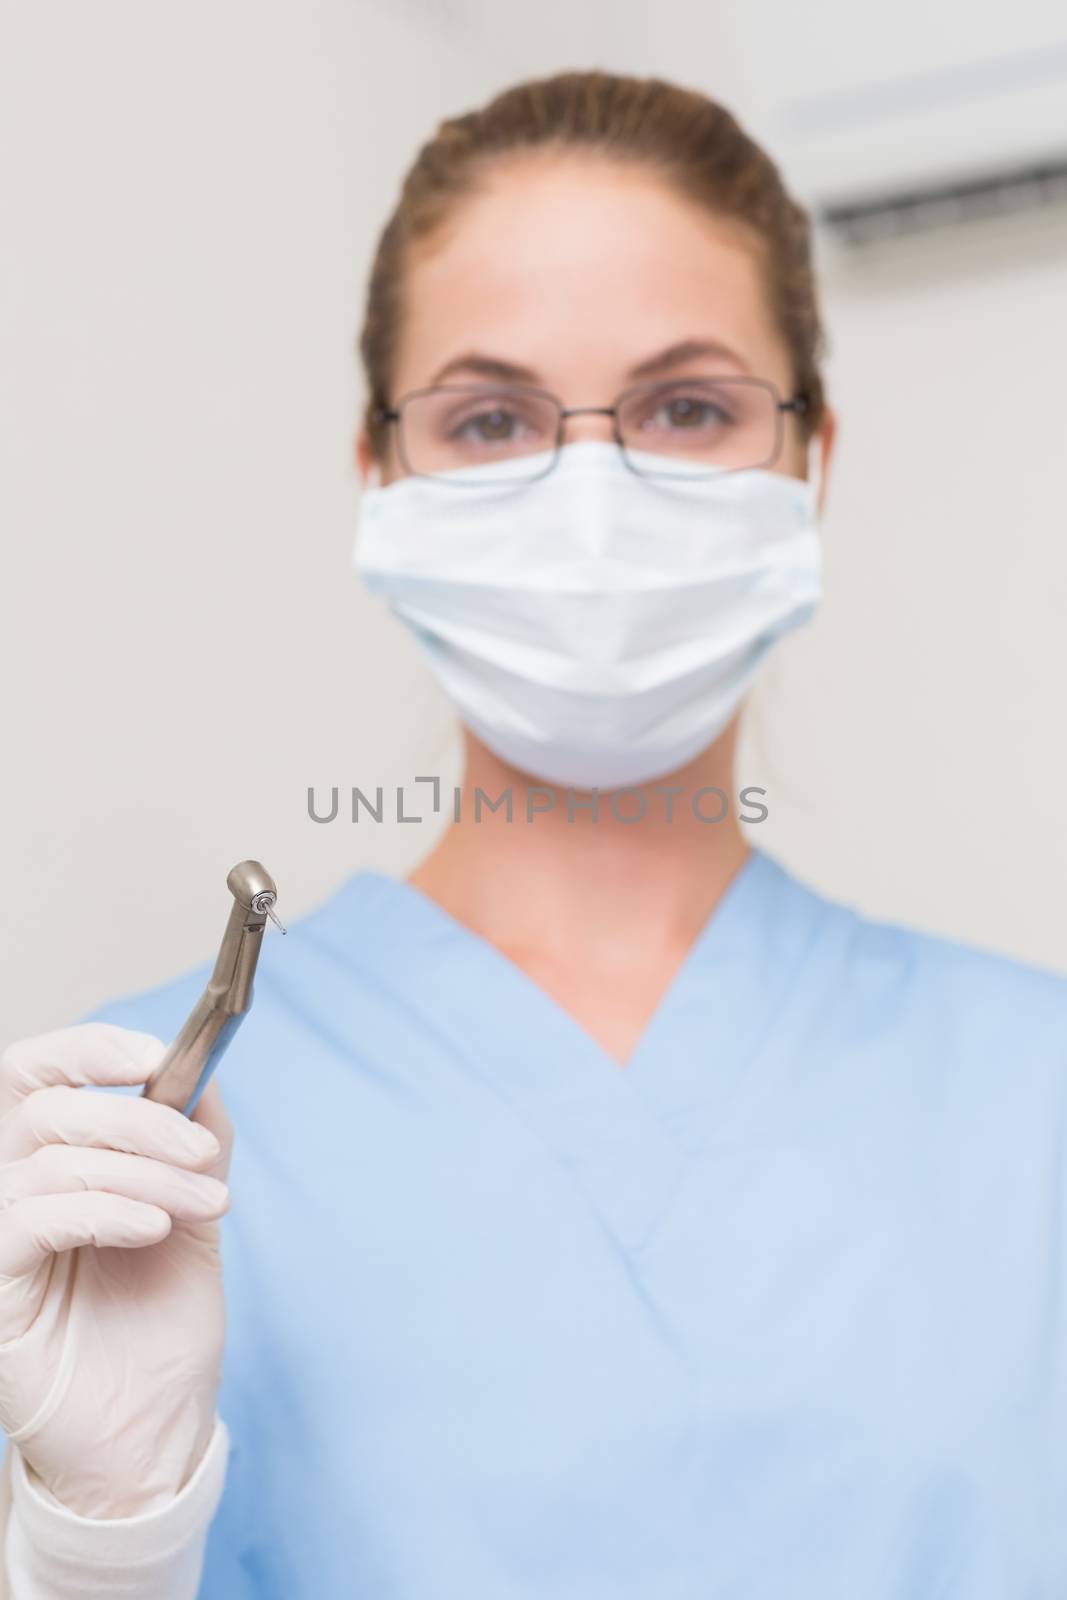 Dentist in blue scrubs holding drill looking at camera by Wavebreakmedia